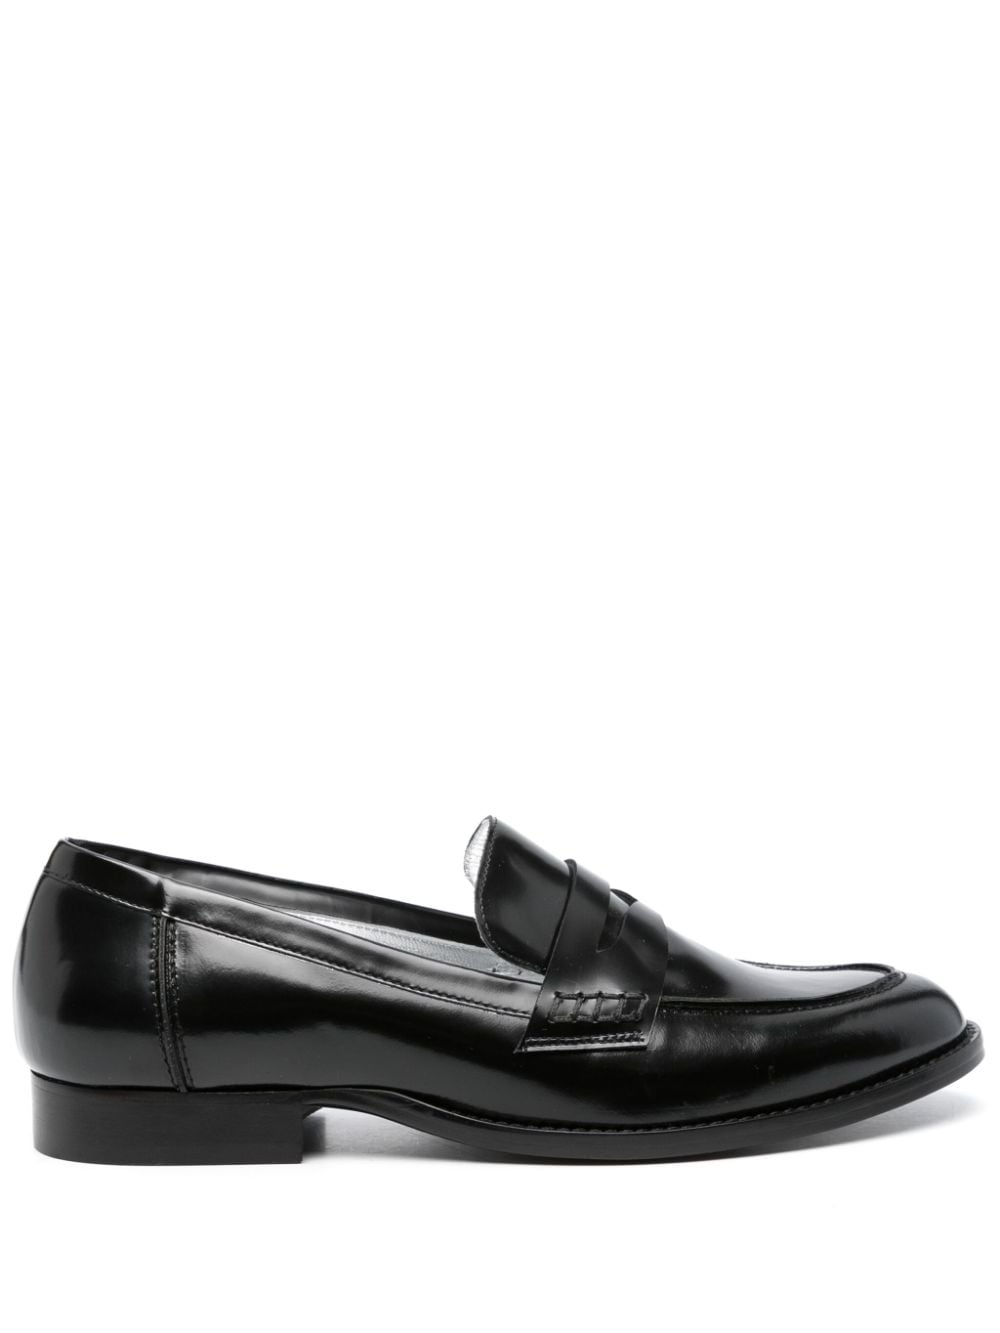 Orczy leather loafers